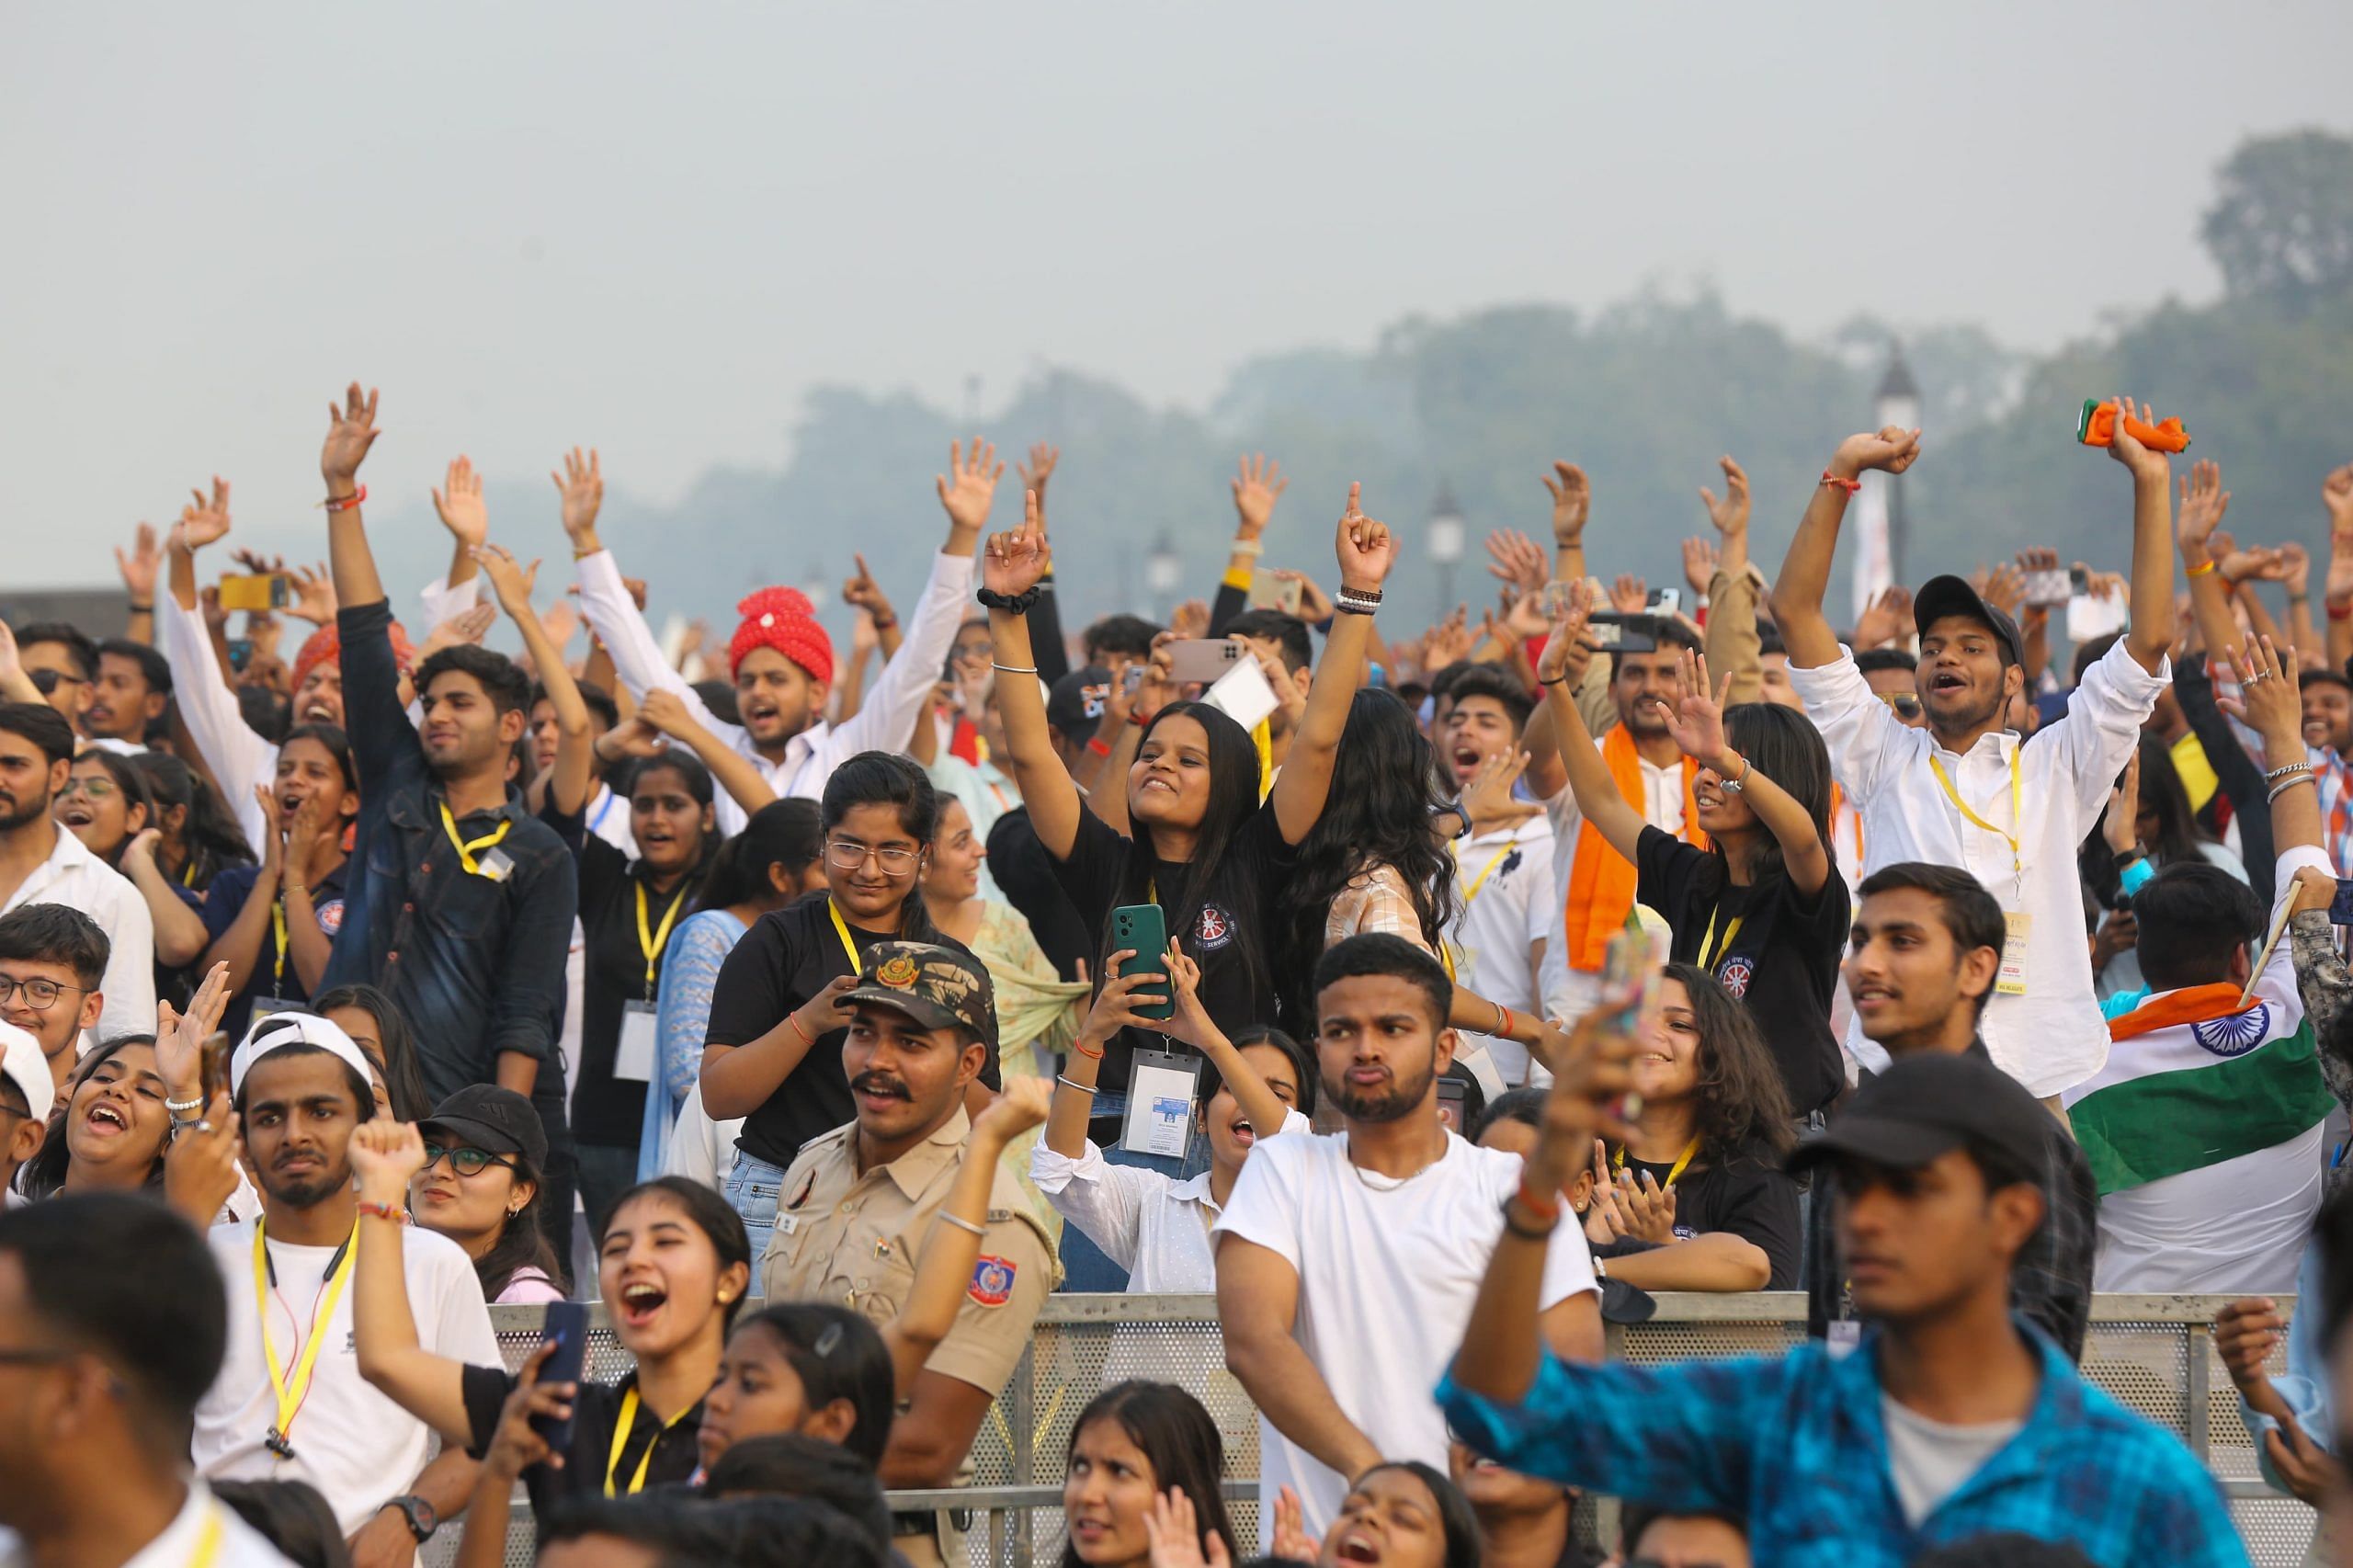 People cheer singer Kailash Kher as he performs at the event | Photo: Suraj Singh Bisht | ThePrint